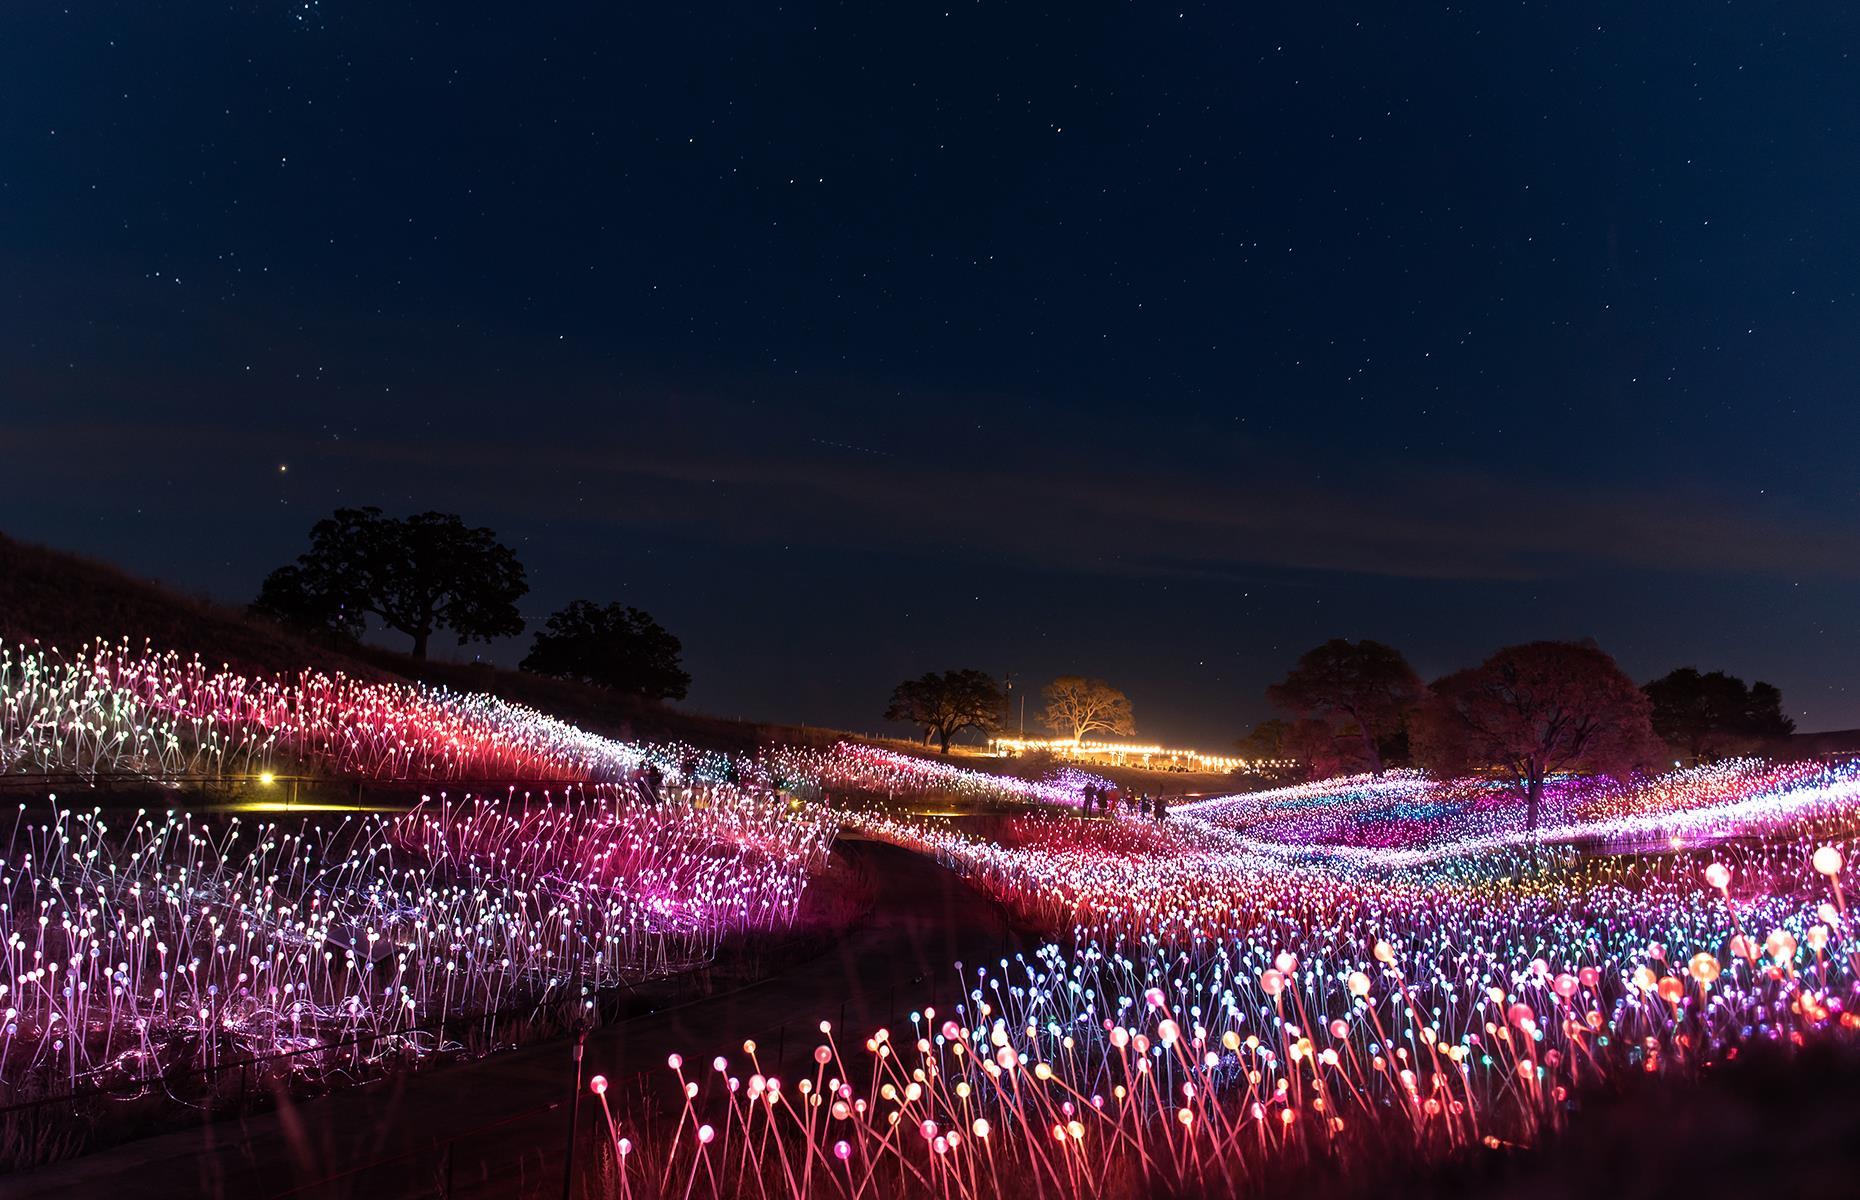 <p>If you’re after a more unusual way to experience California’s wine country, check out <a href="https://sensoriopaso.com/">Light at Sensorio</a>. Created by England-born artist Bruce Munro, it features two twinkling installations stretched across the landscape: Field of Light and Light Towers. The former sees 15 bucolic acres covered in a rainbow of fiber-optic stems, while the latter comprises 69 tow­ers made from bottles, also aglow in bright colors. Wander around the glittering displays before sinking a sundowner at the Airstream bar. It’s open Thursday, Friday, Saturday and Sunday evenings throughout the summer and tickets can be booked online in advance. </p>